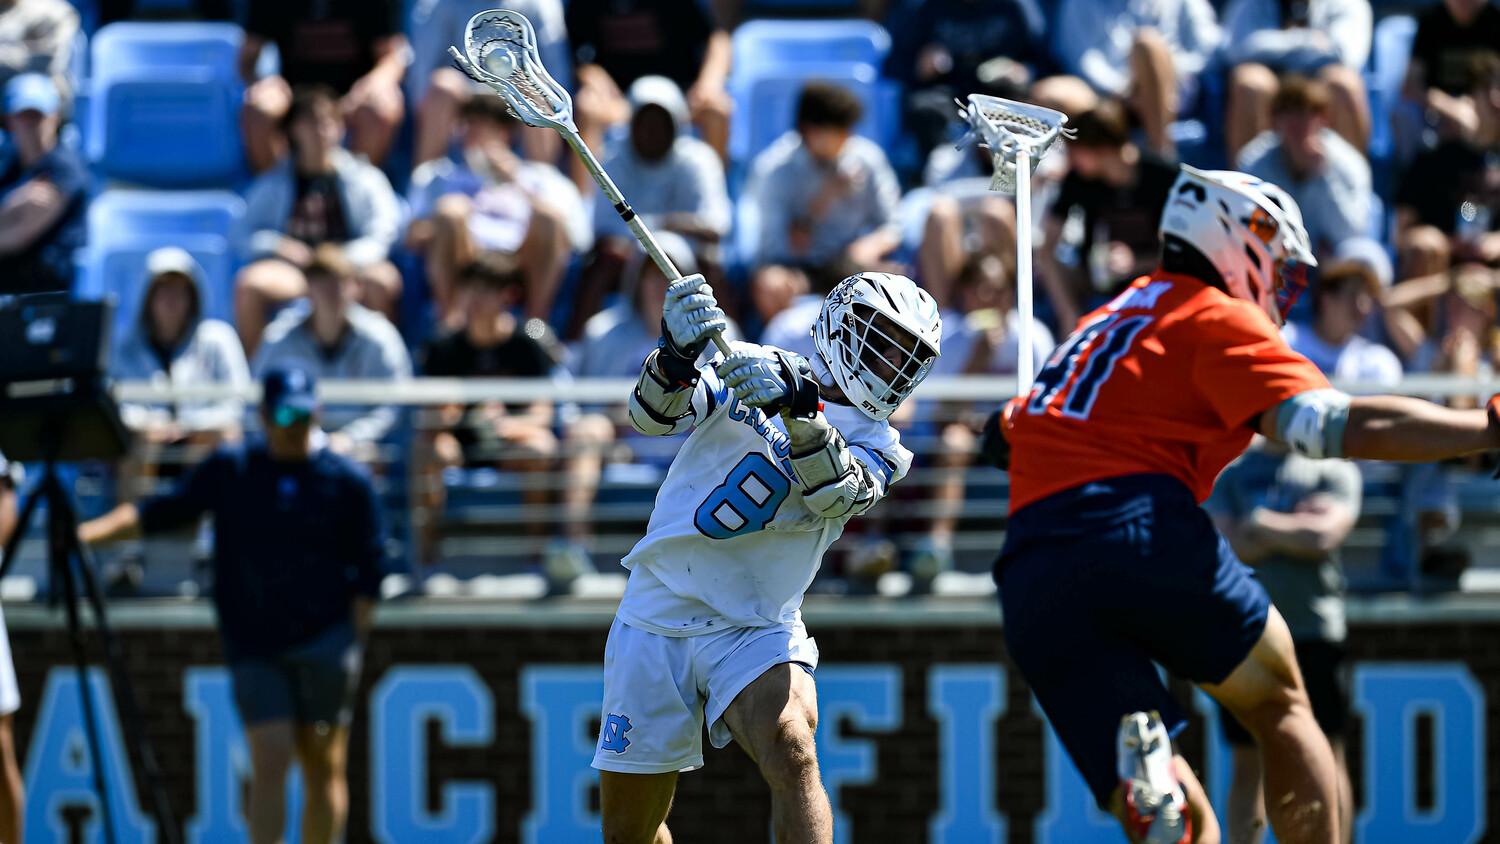 Owen Duffy tied for a team-leading 32 goals, which also tied the attackman for most goals in a single season by a University of North Carolina freshman in program history. UNC Athletics